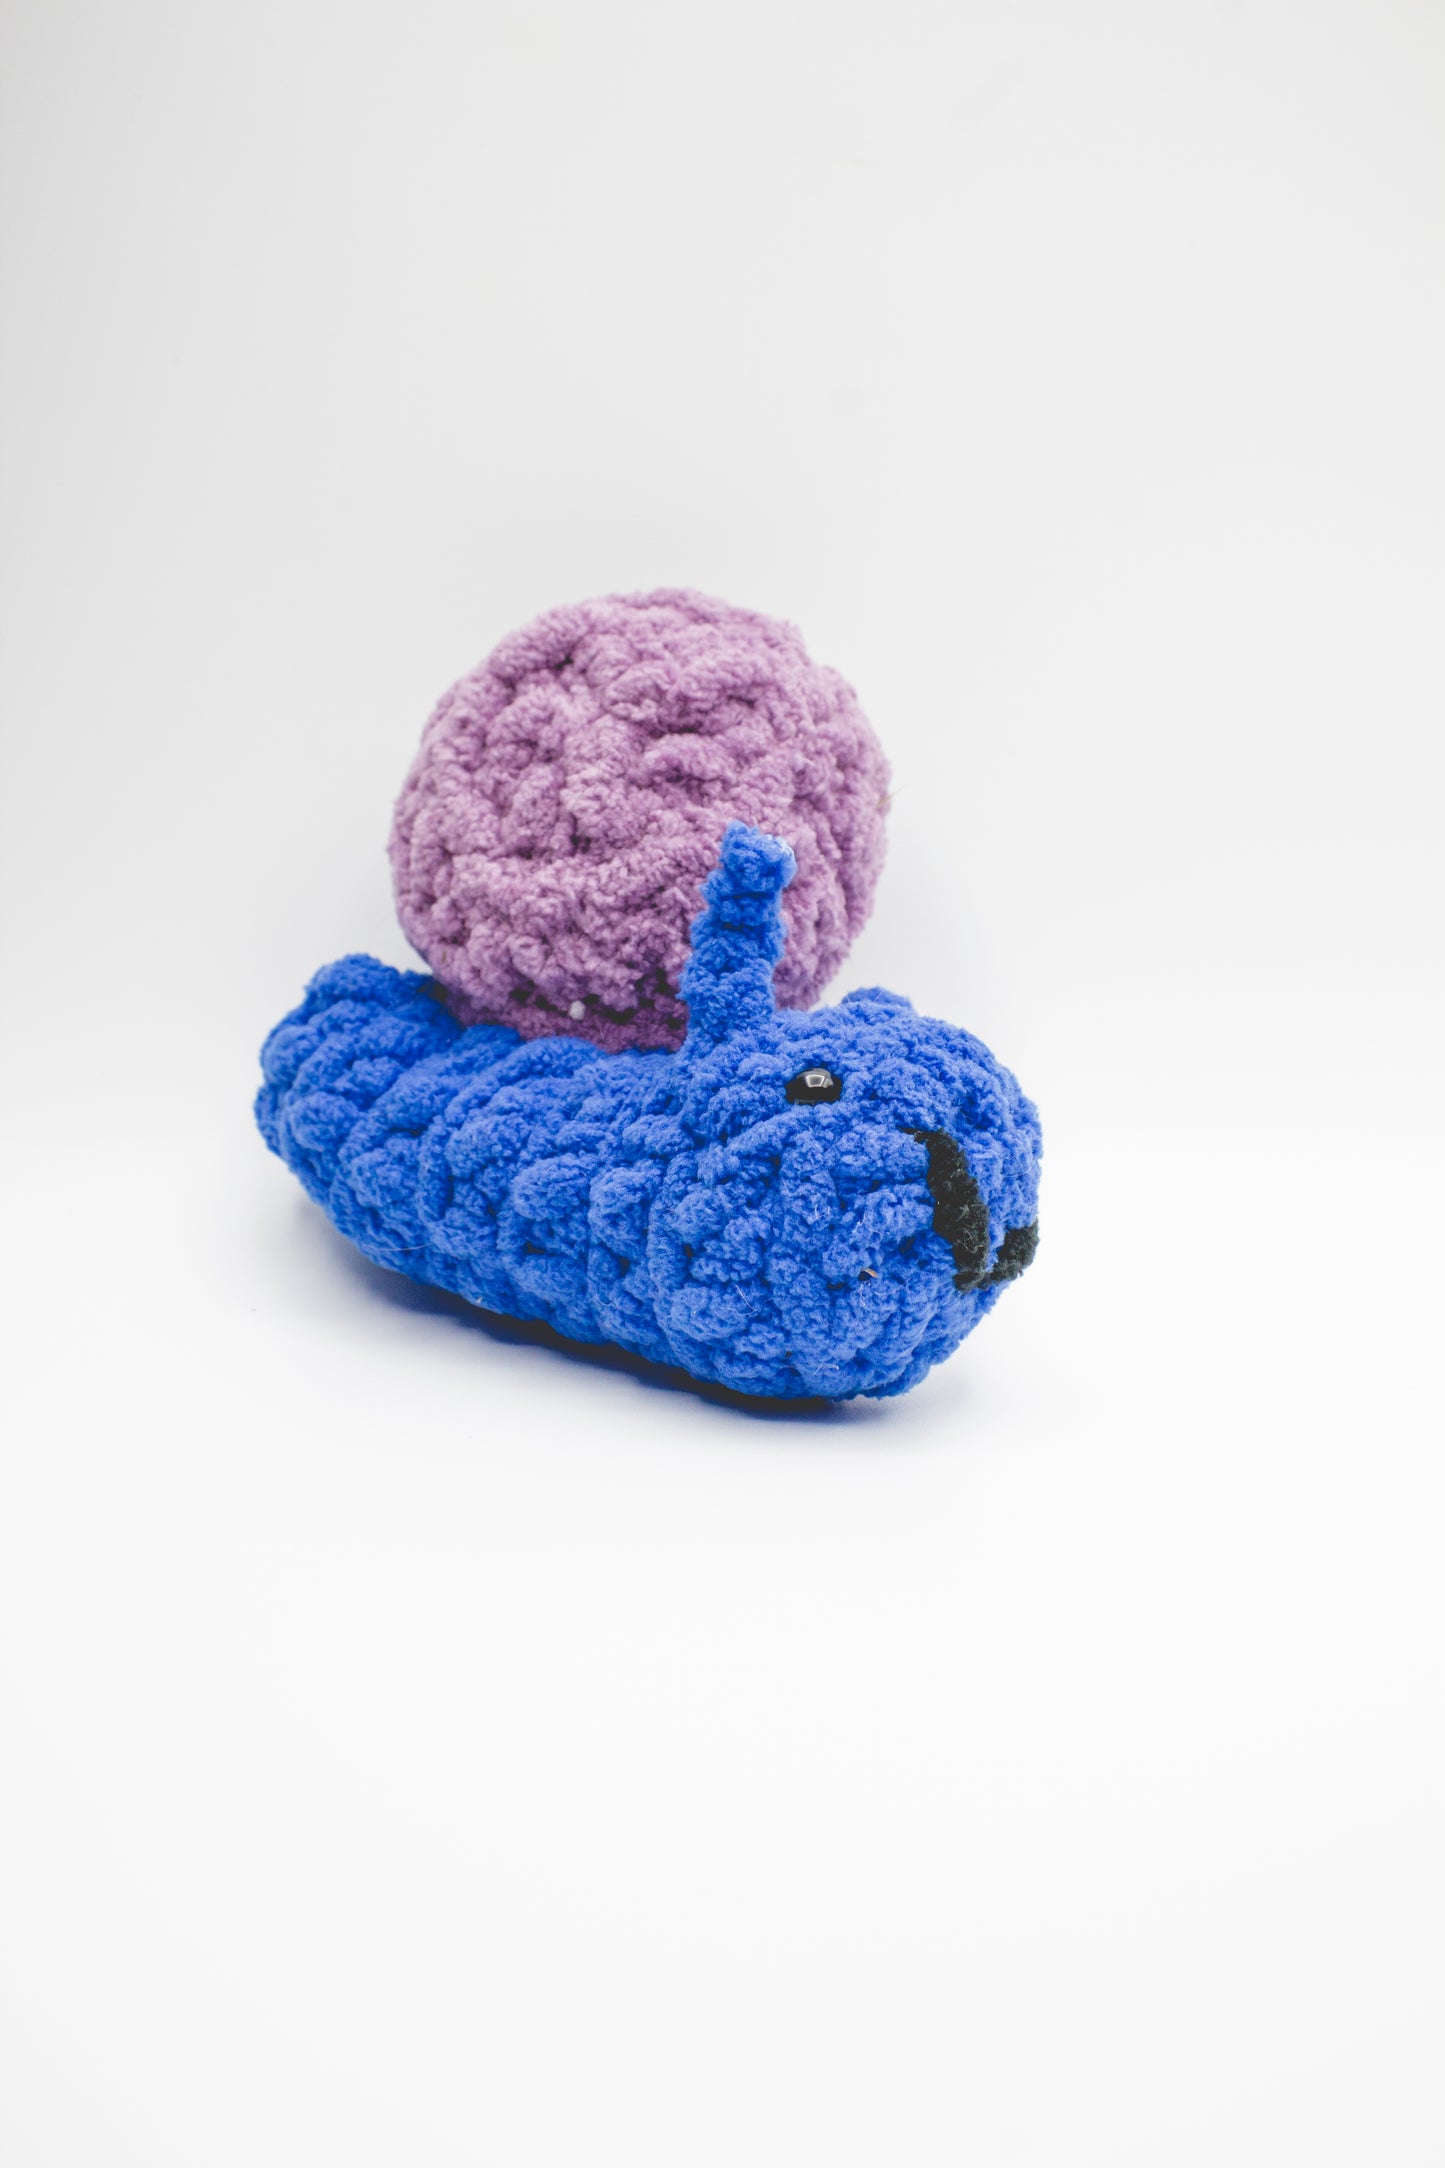 Snail hand-crocheted plushie